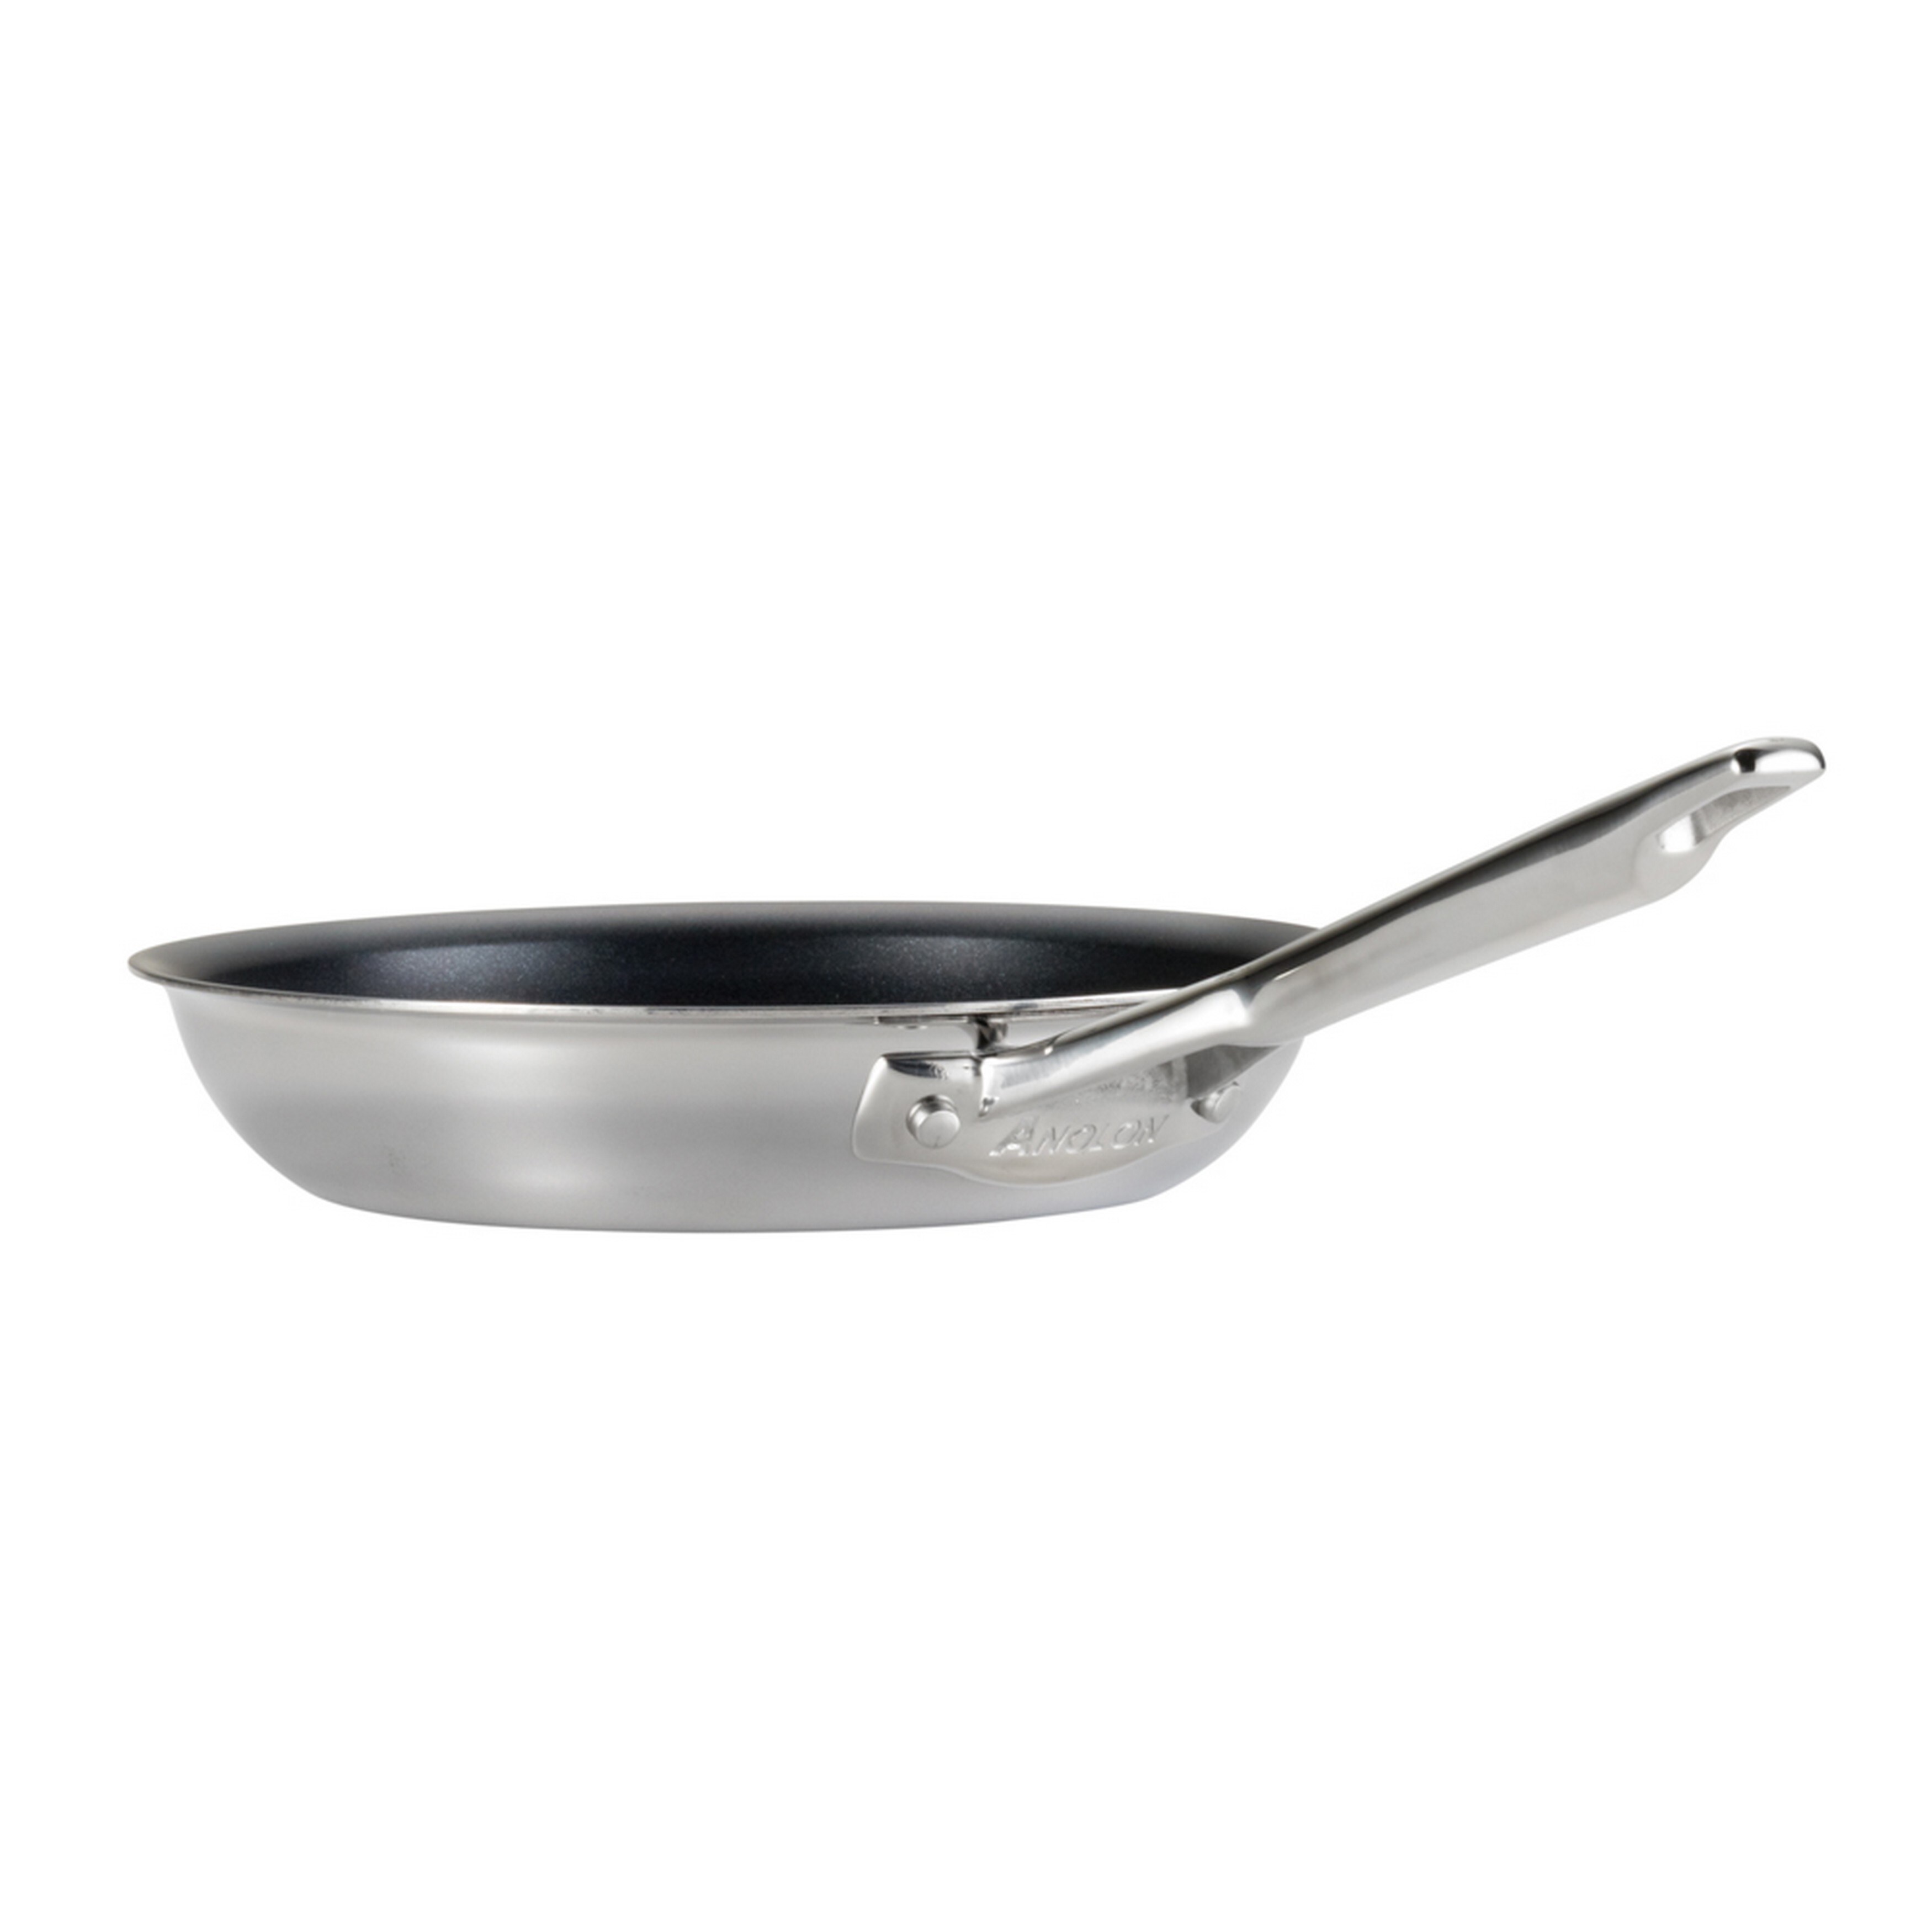 https://ak1.ostkcdn.com/images/products/9206705/Anolon-Tri-ply-Clad-Stainless-Steel-12-3-4-inch-Nonstick-French-Skillet-c75b18a5-53df-438f-8f48-f9c703c1bab8.jpg